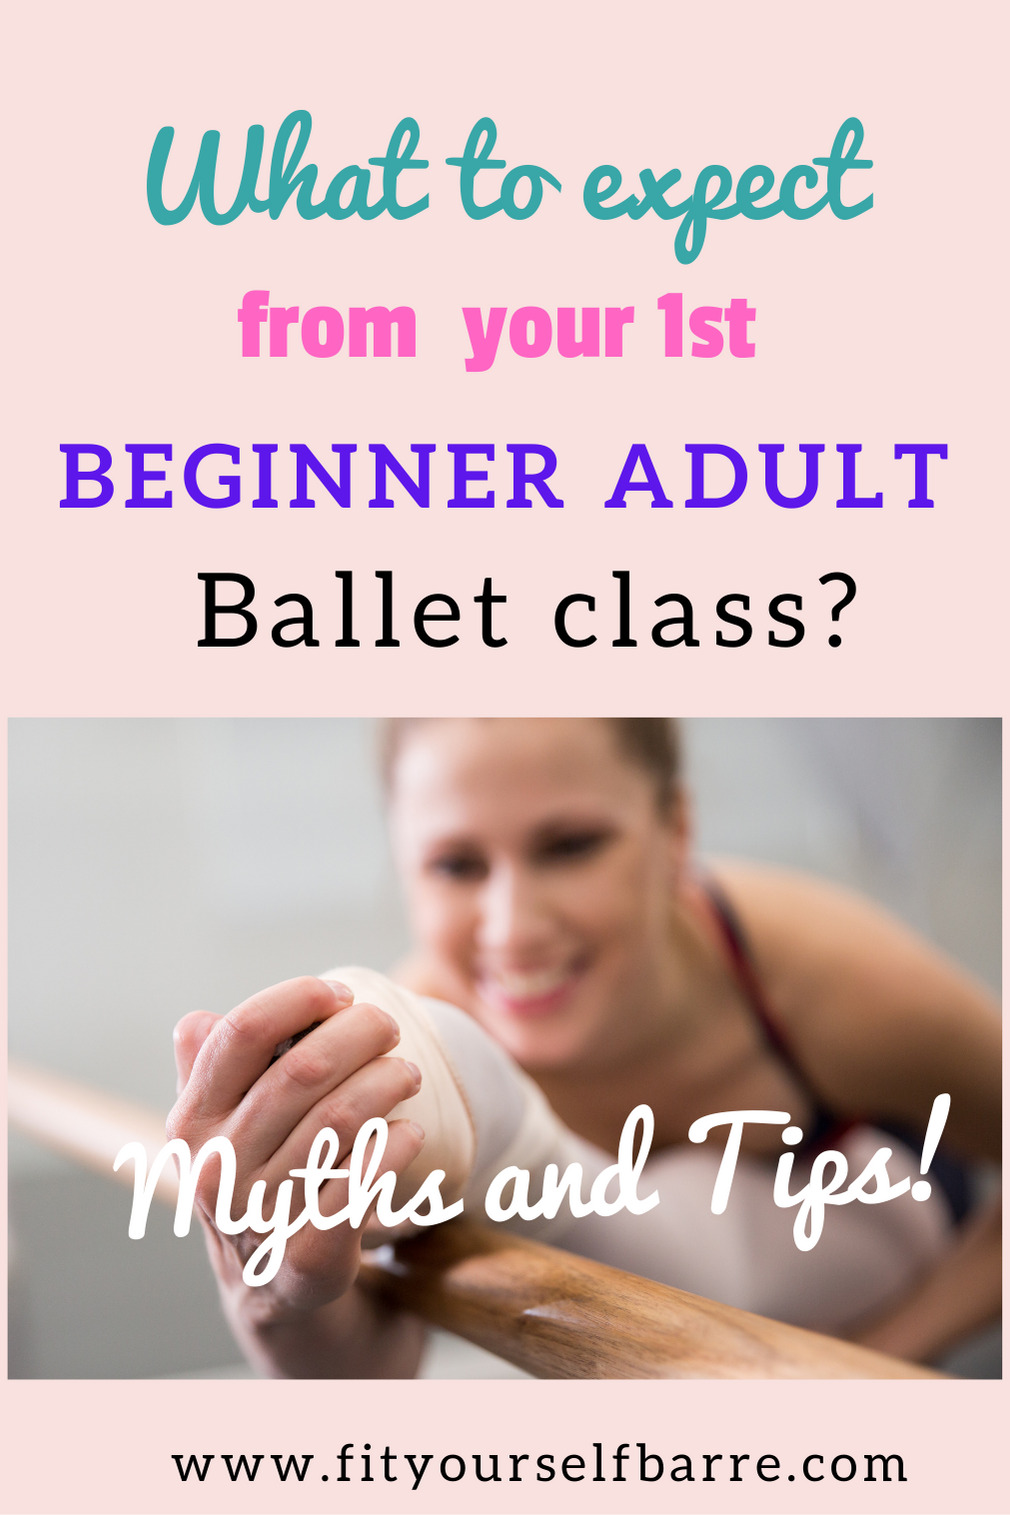 Adult Beginner Ballet Class-a woman stretching at the barre